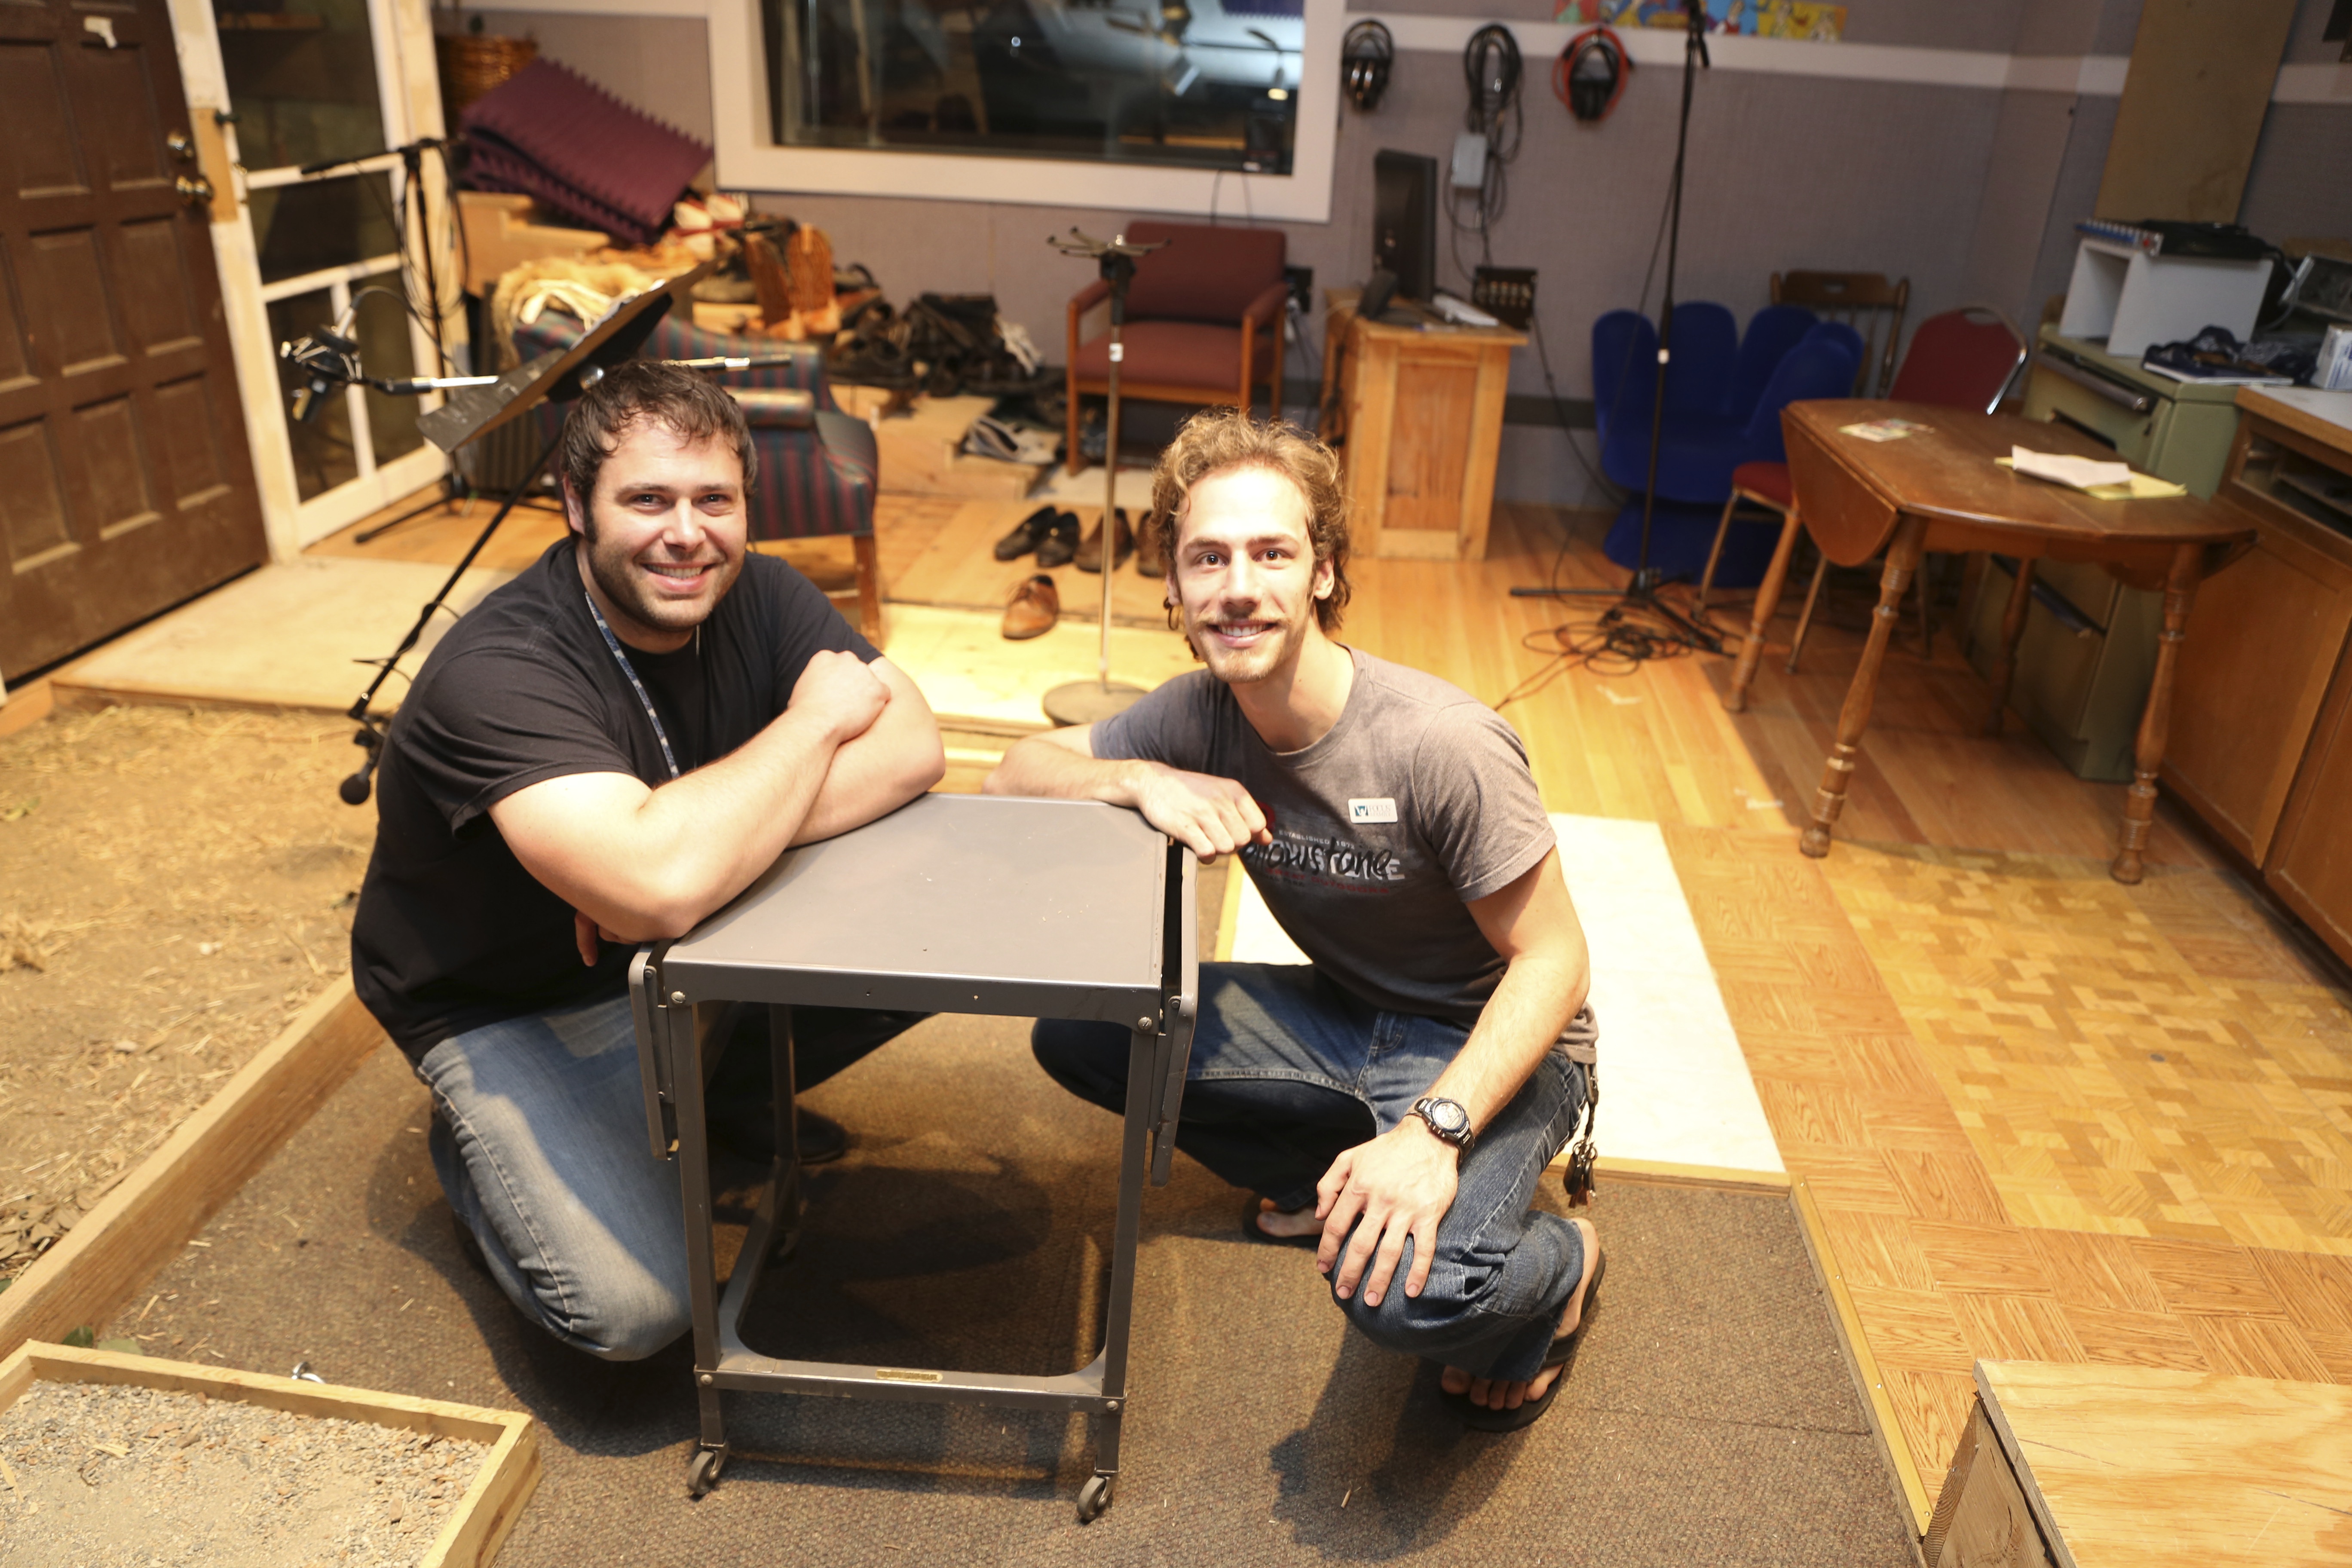 Sound designer Nate Jones (Adventures In Odyssey) with Nathan Jacobson at the Focus On The Family recording studio in Colorado Springs.